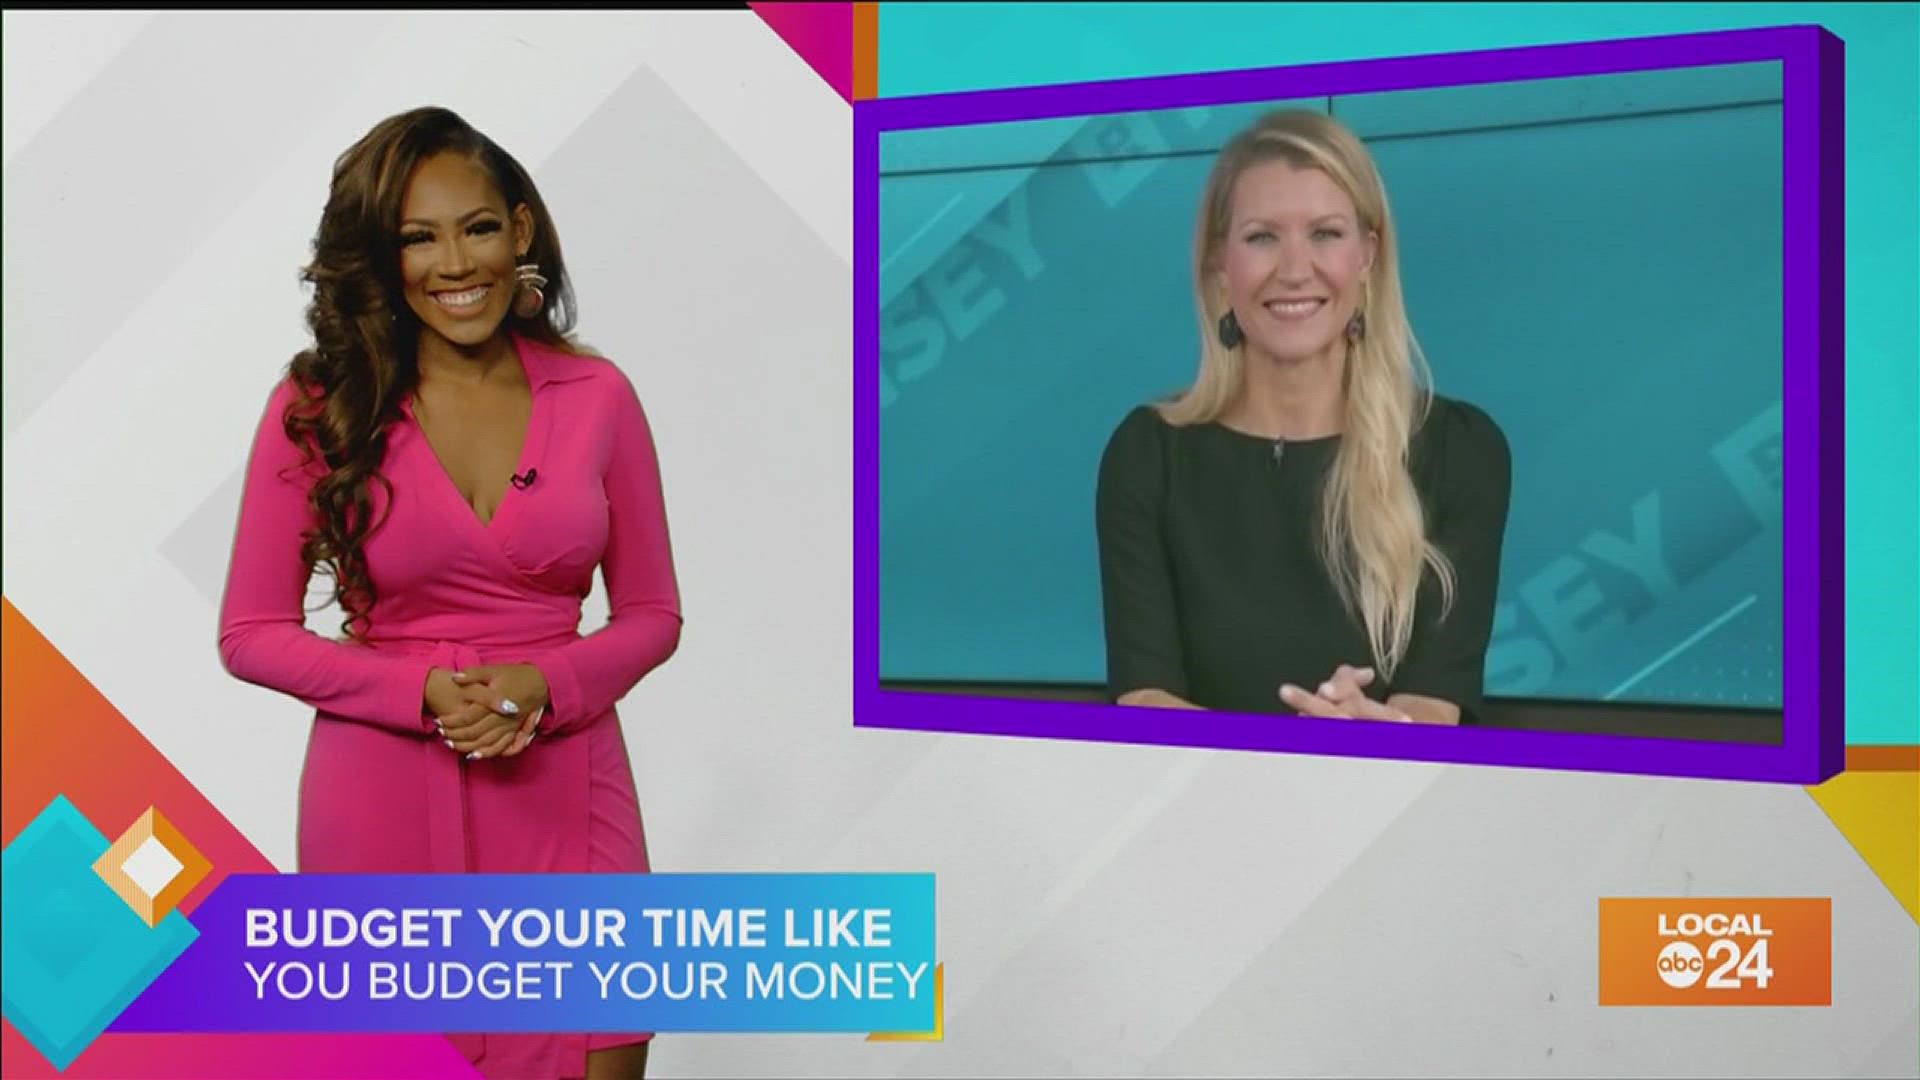 Don't let others figure out your schedule for you! Join Sydney Neely and personal development expert for ways to take back your time and budget it like your money!